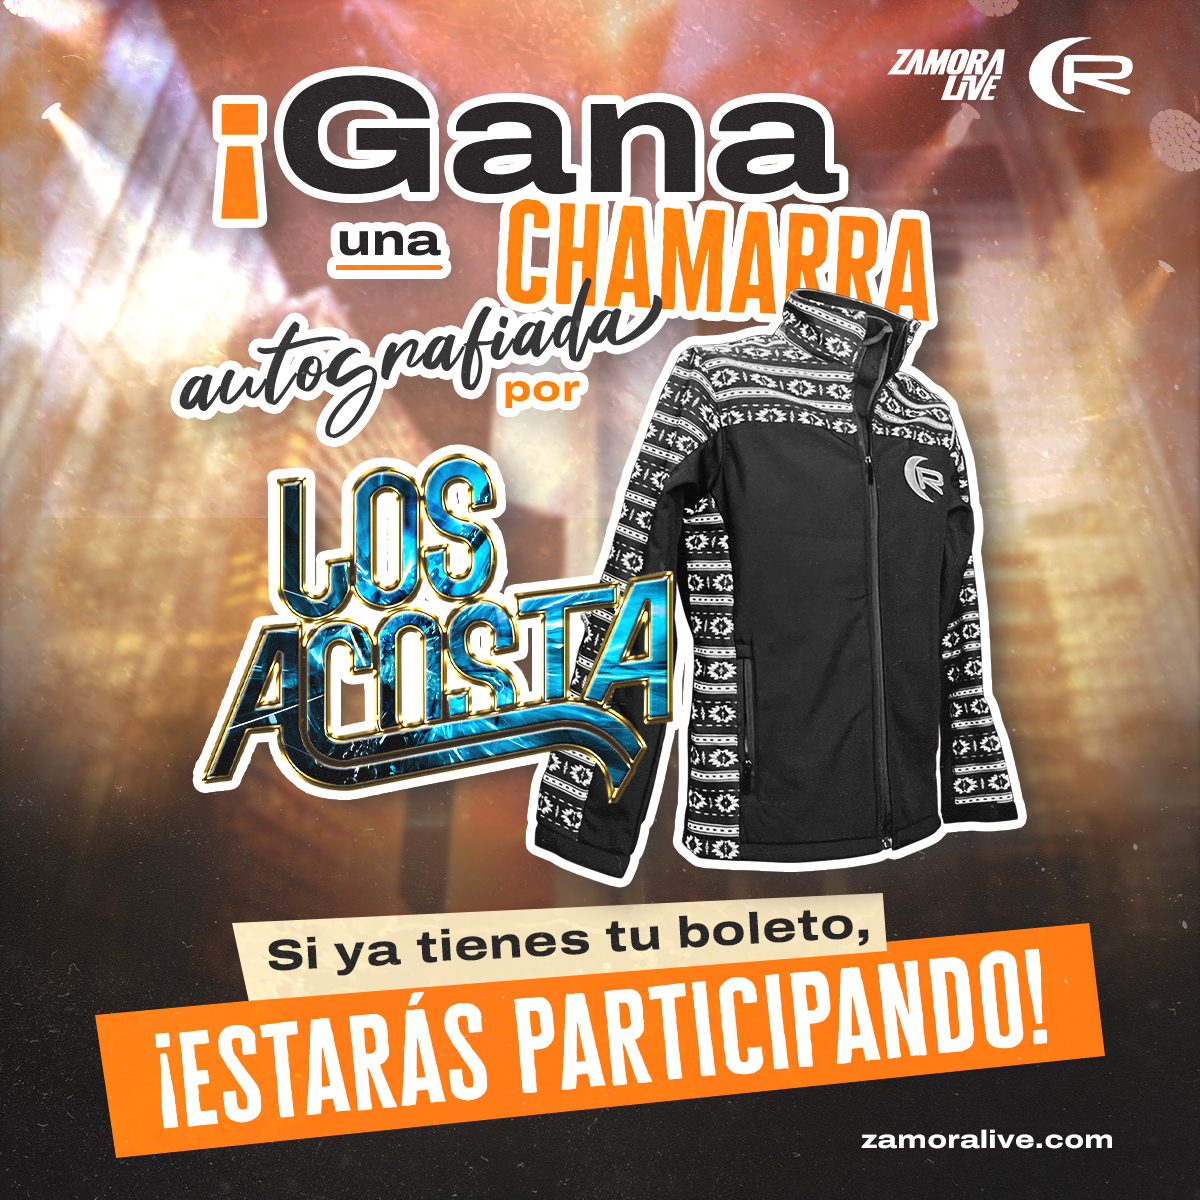 You still have time to get tickets to Los Acosta. Ticket purchasers are automatically entered into a contest to win an autographed jacket from the band. bit.ly/3UfbMZP